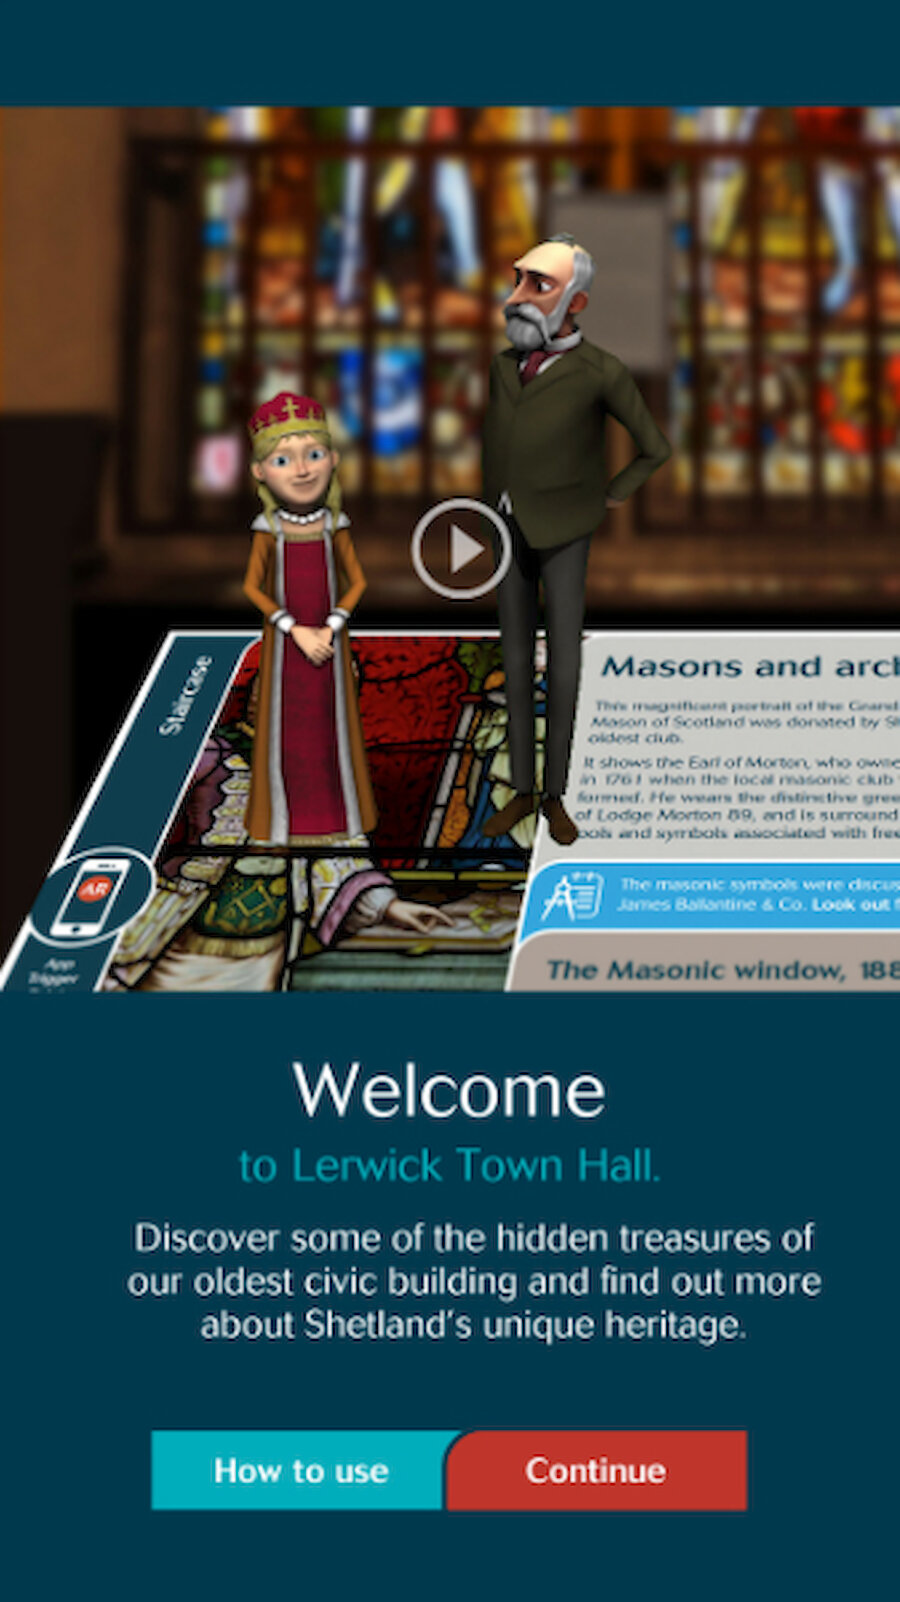 The app also features the animated characters of Margaret, the Maid of Norway and Arthur Laurenson, whose ideas were so important in the decoration of the building (Courtesy Shetland Islands Council)